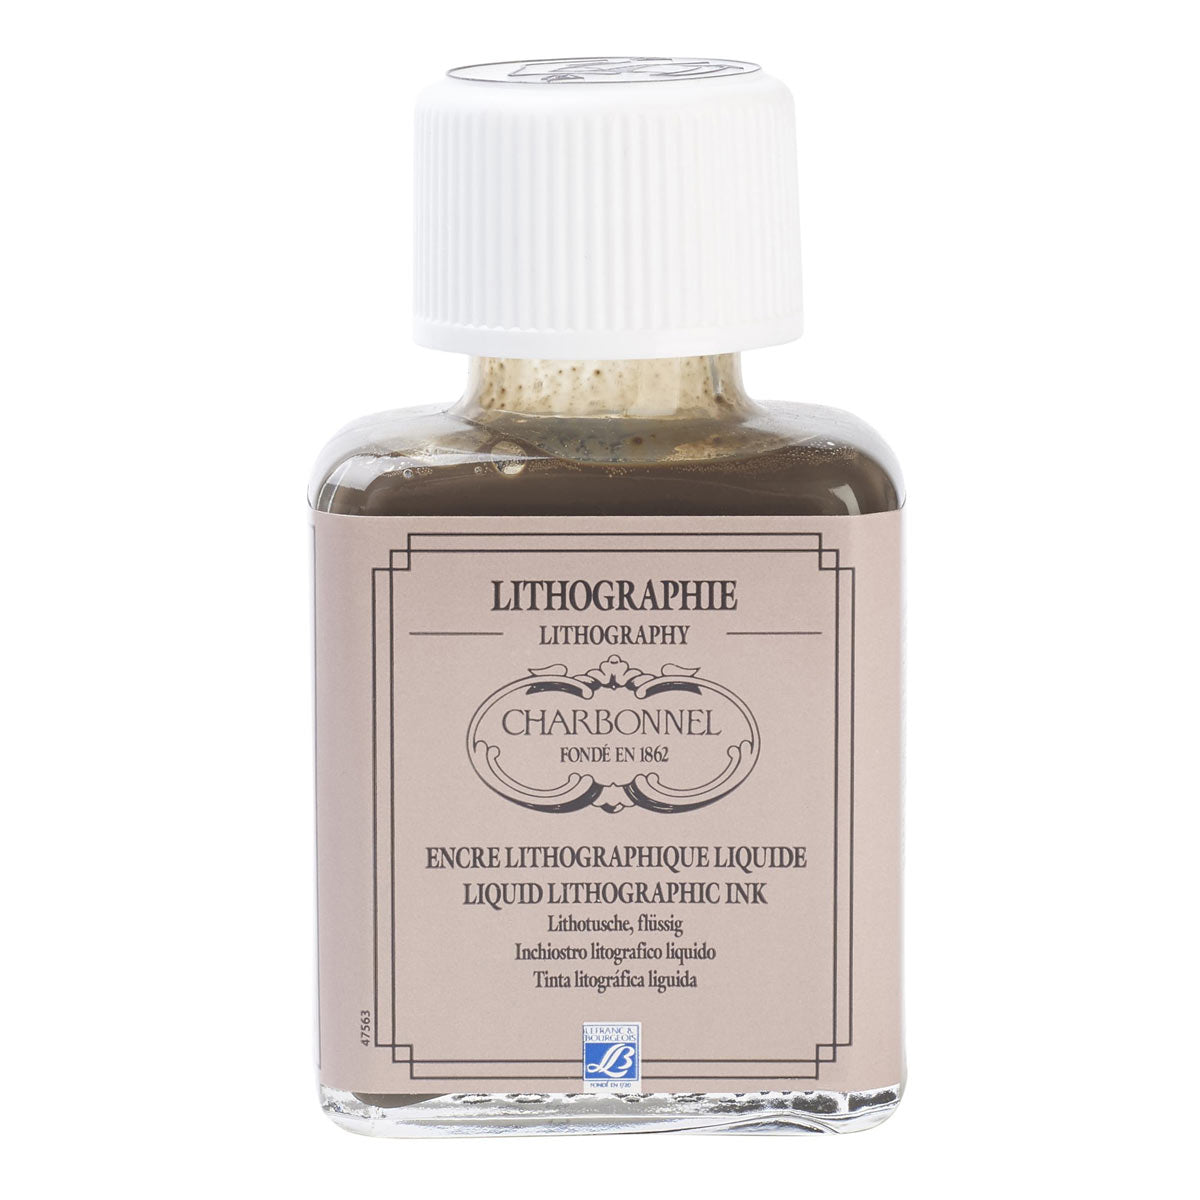 Charbonnel - Lithography Autographic Ink 75ml